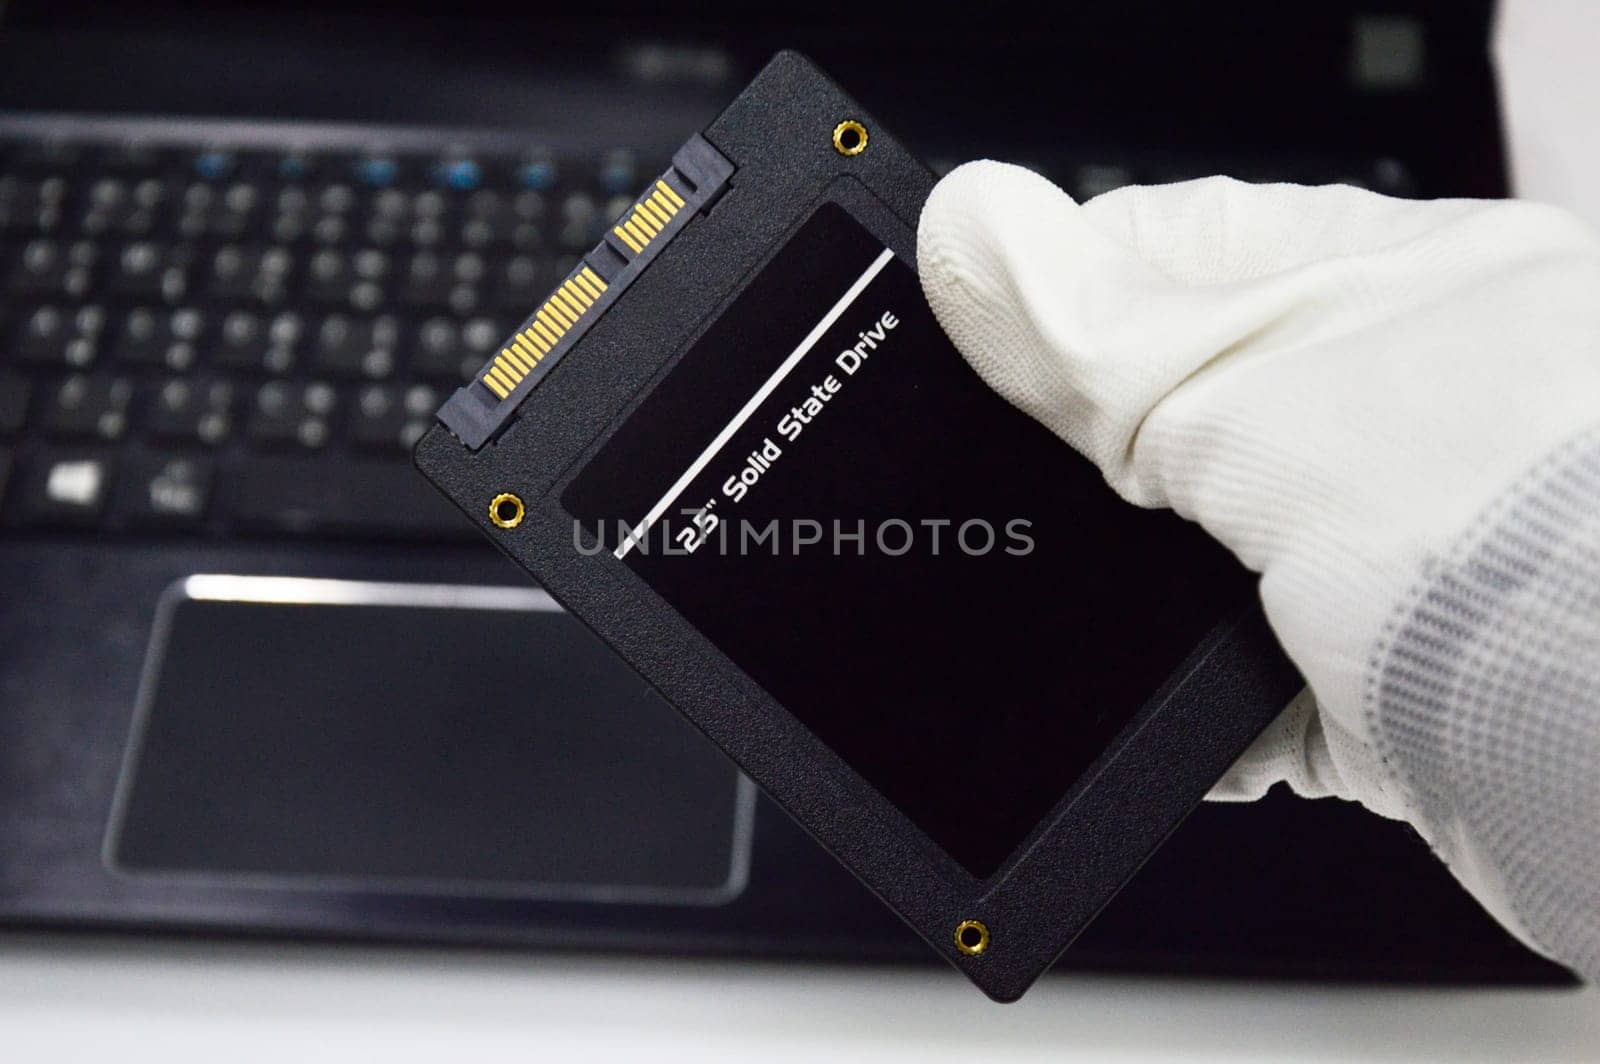 Harddisk SSD 2.5 inch black that is holding in hand.